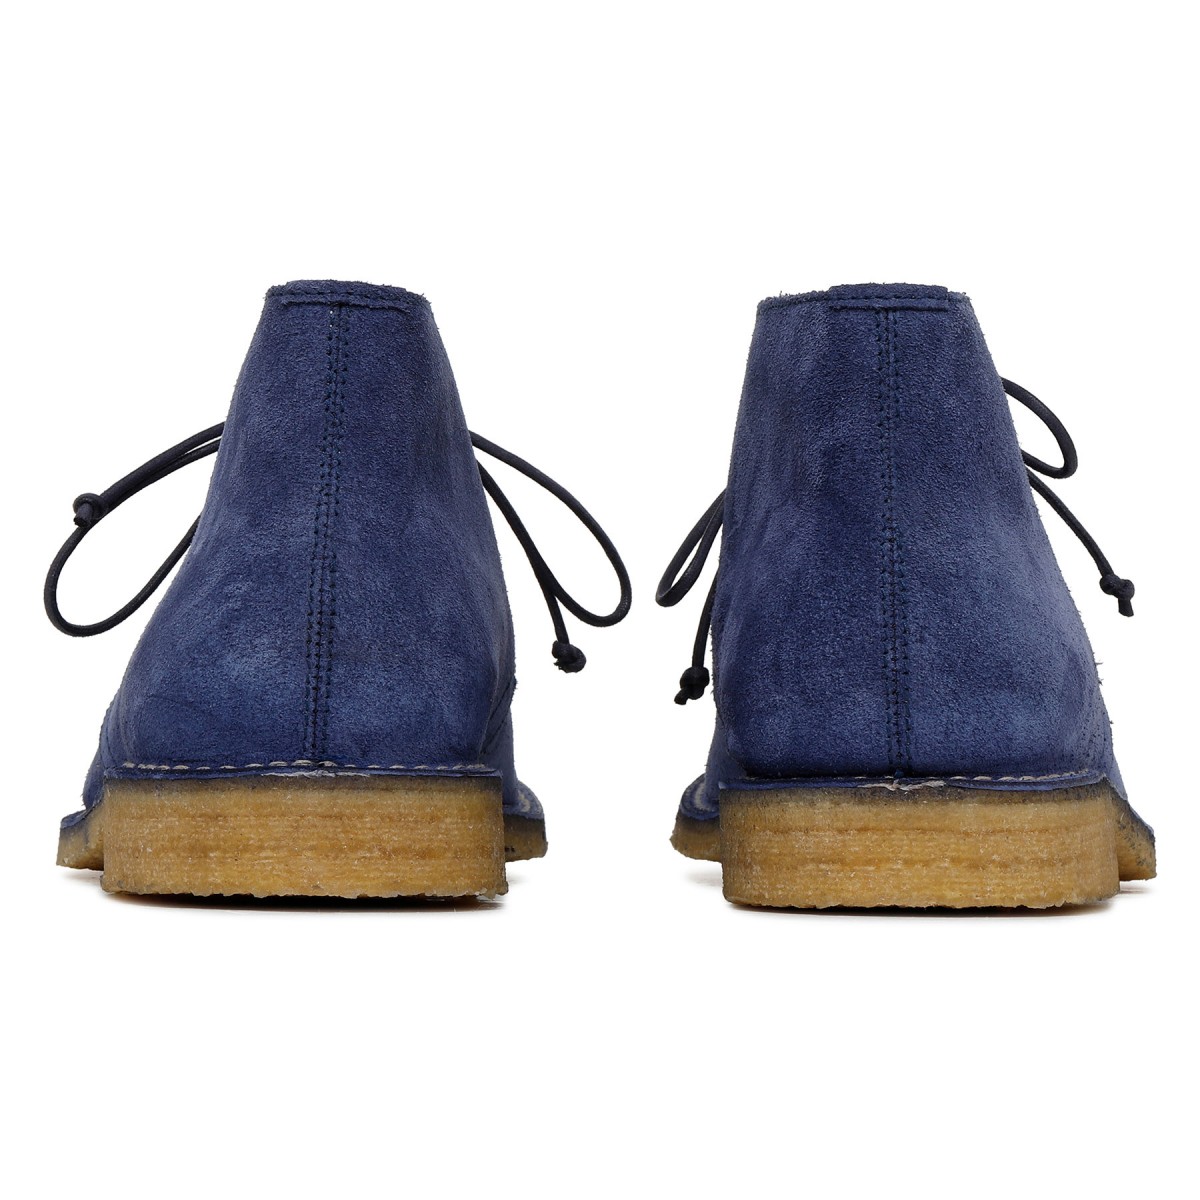 Londra blue suede ankle boots